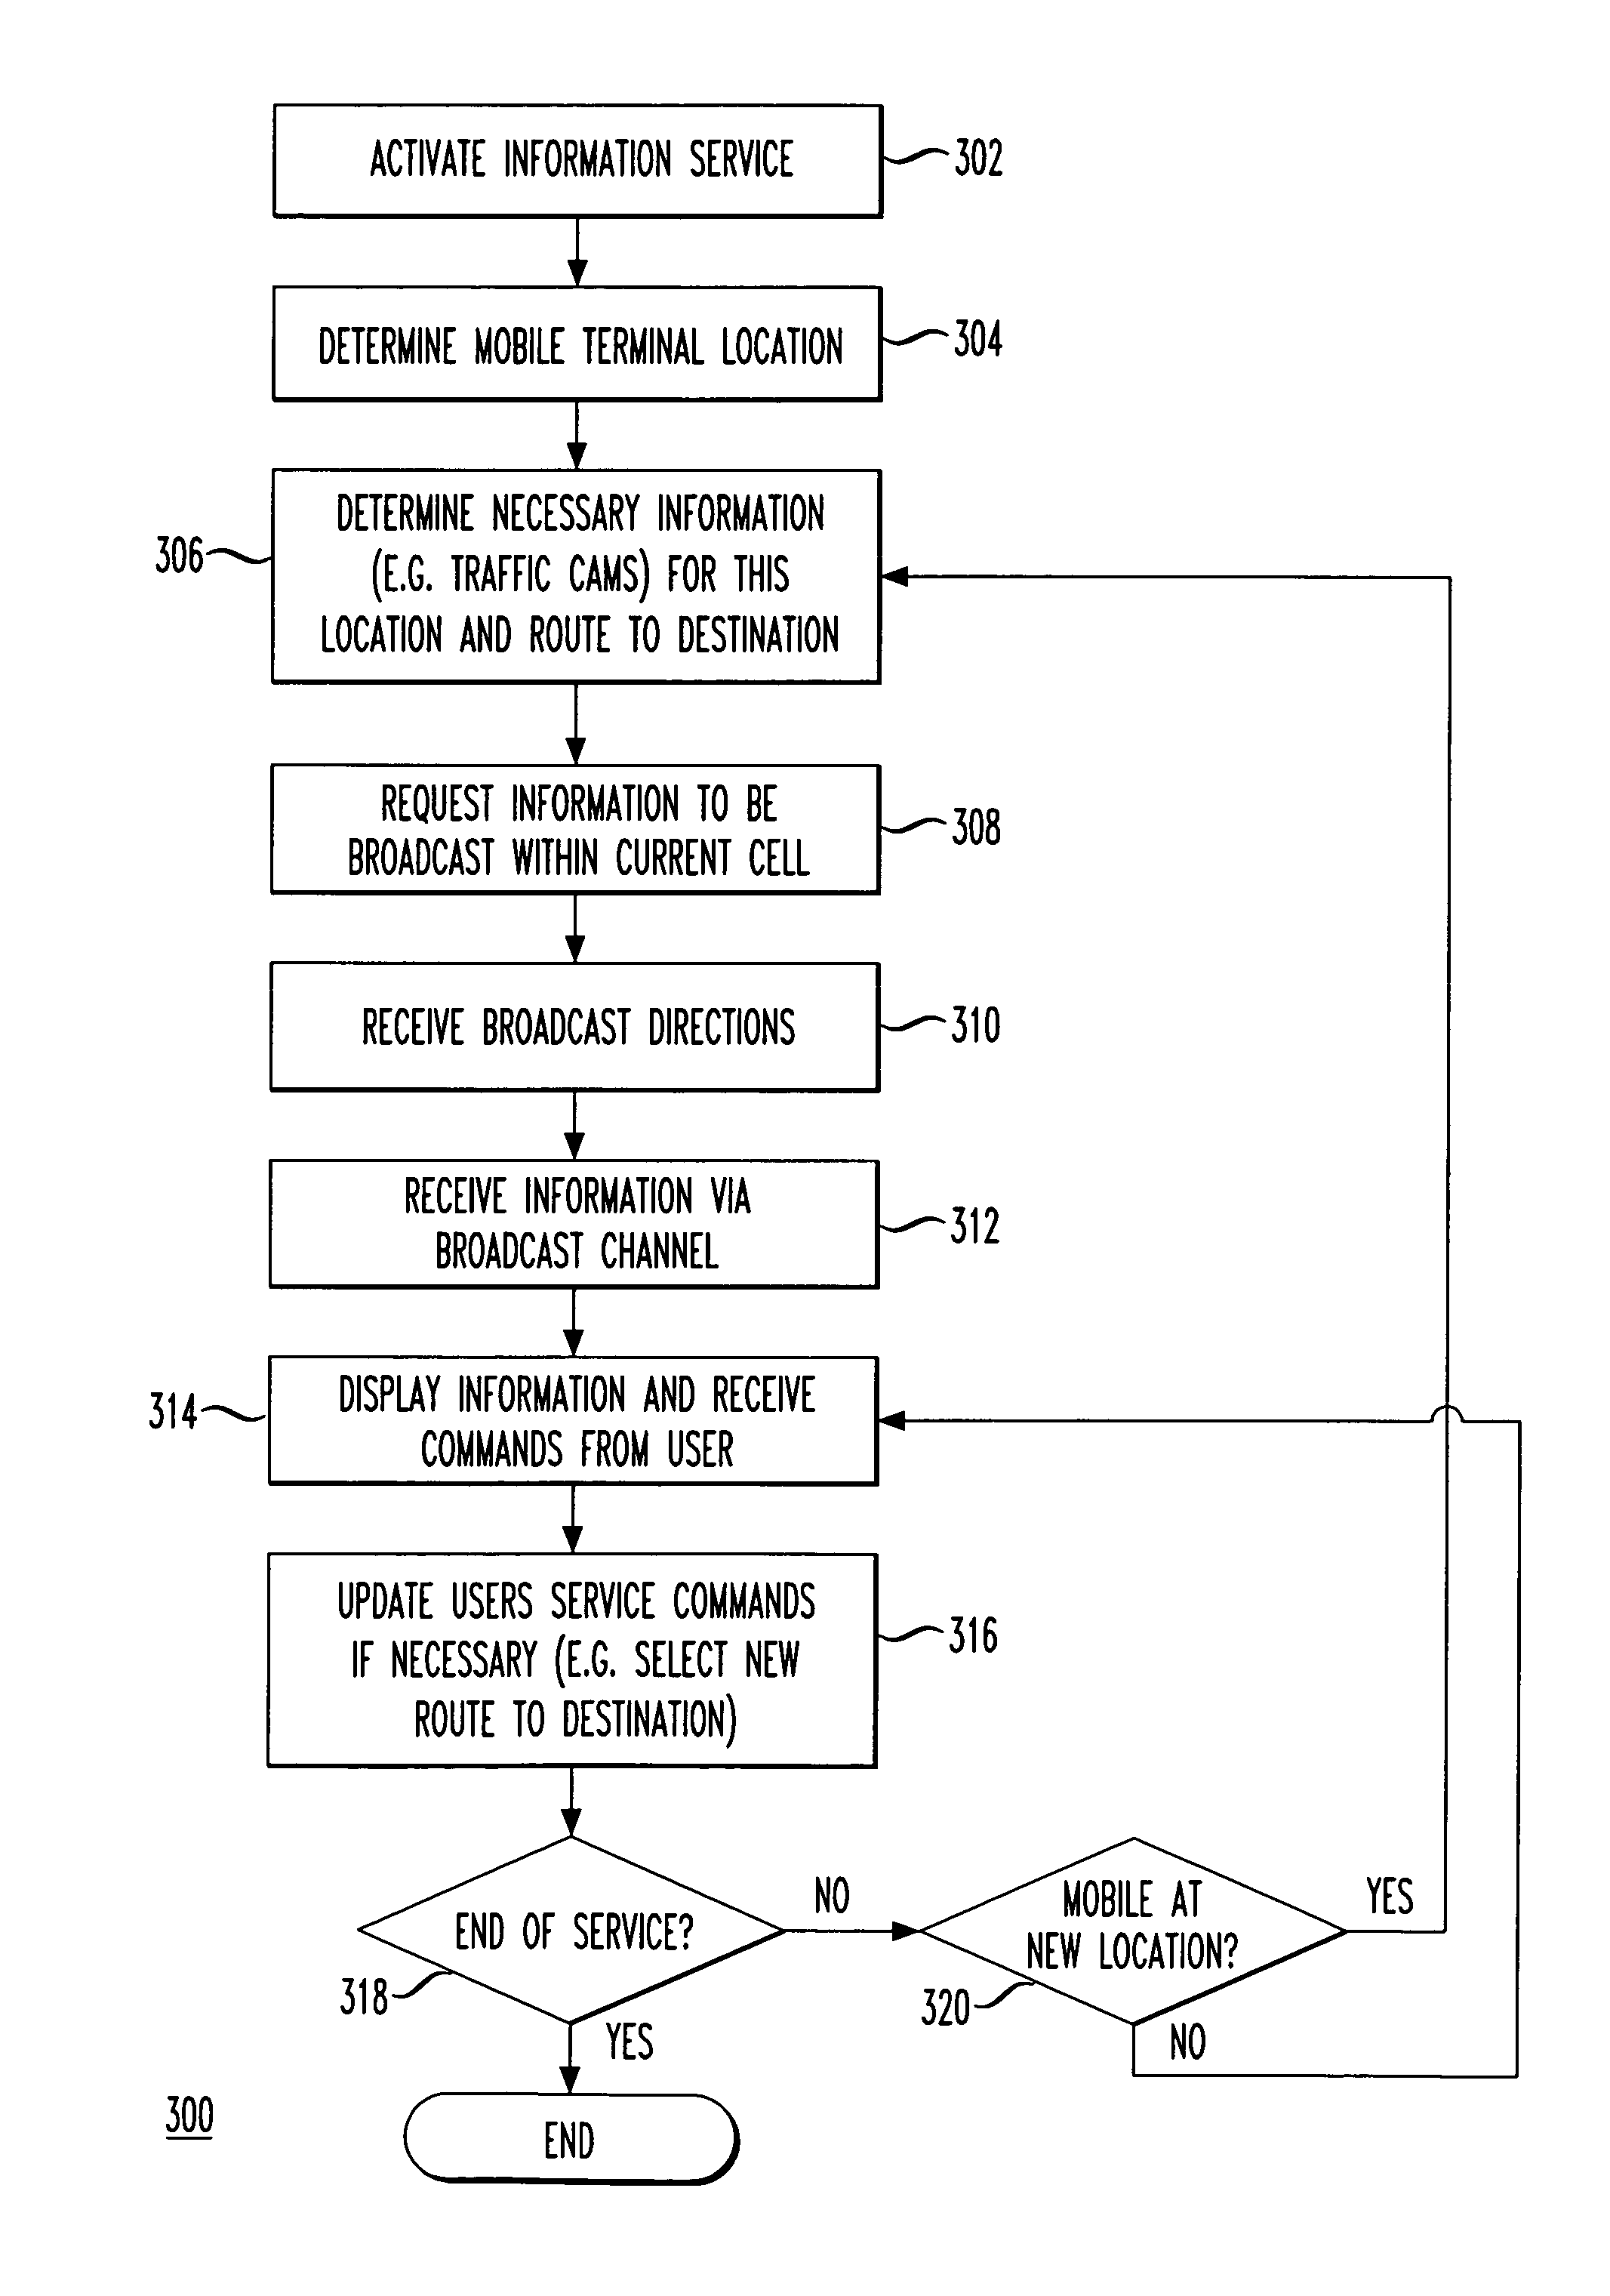 Wireless communication network having a broadcast system for information distribution